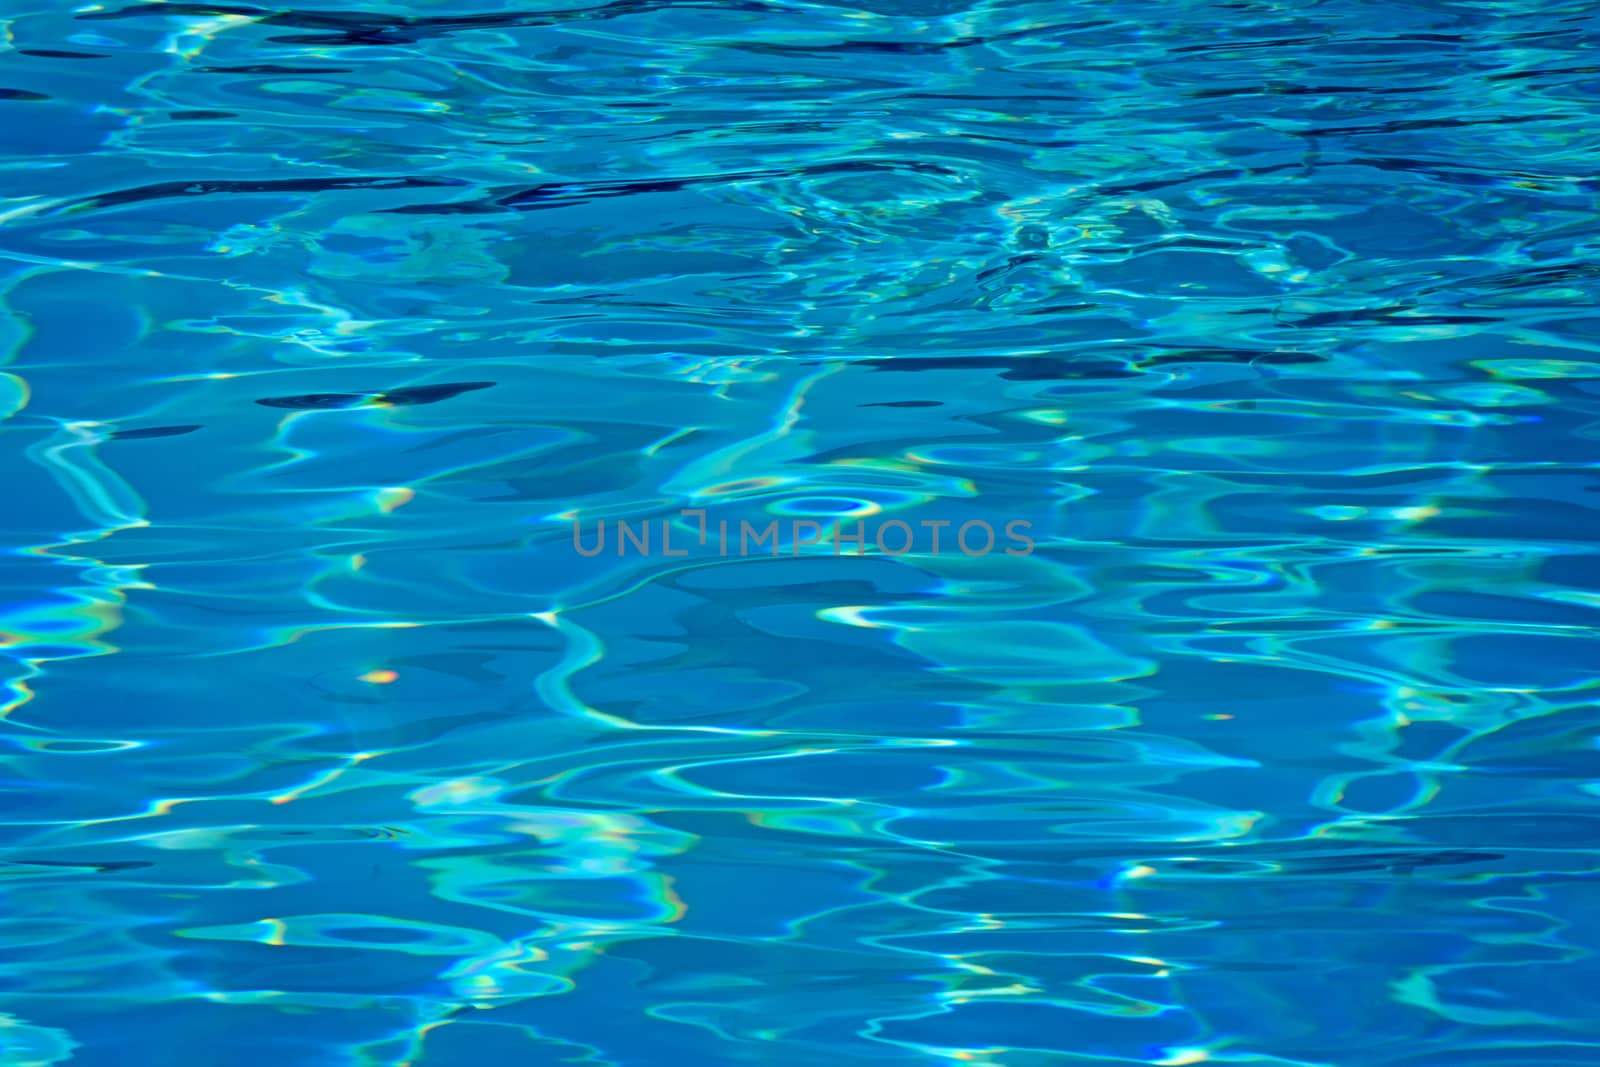 Fragment have been added at the bottom of the pool with water by georgina198